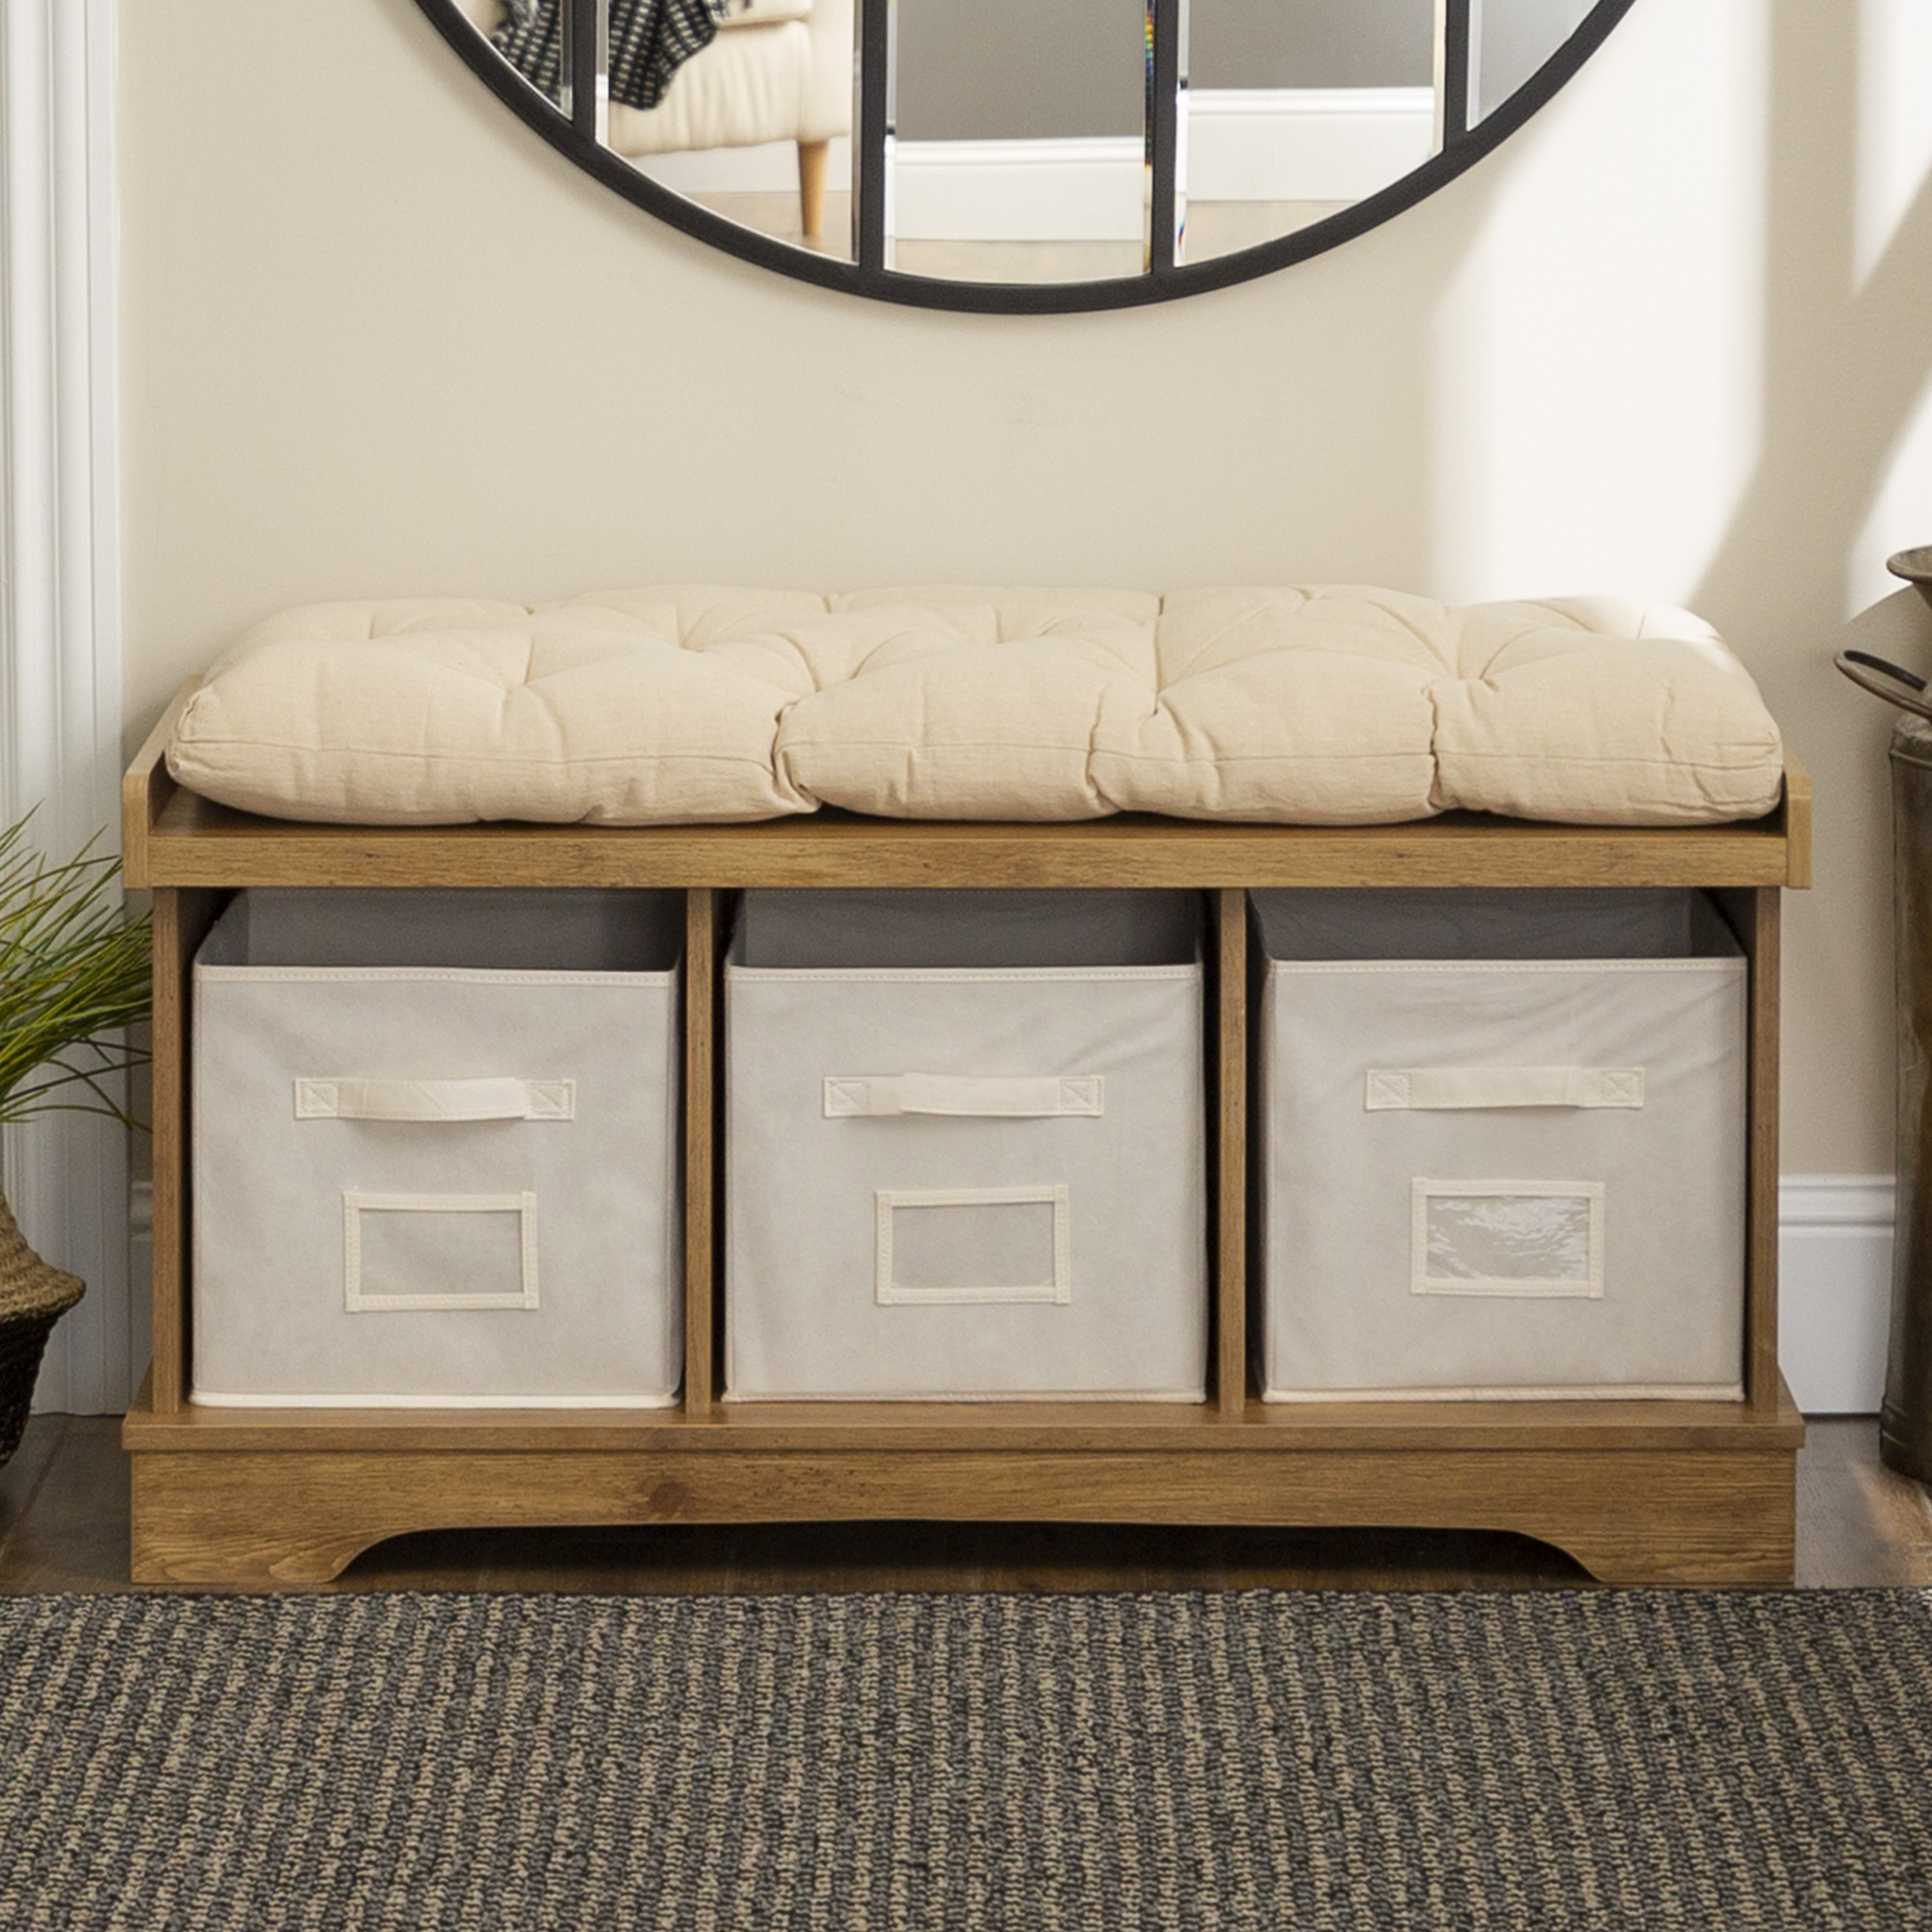 Woven Paths Storage & Tufted Bench, Barnwood - image 1 of 8